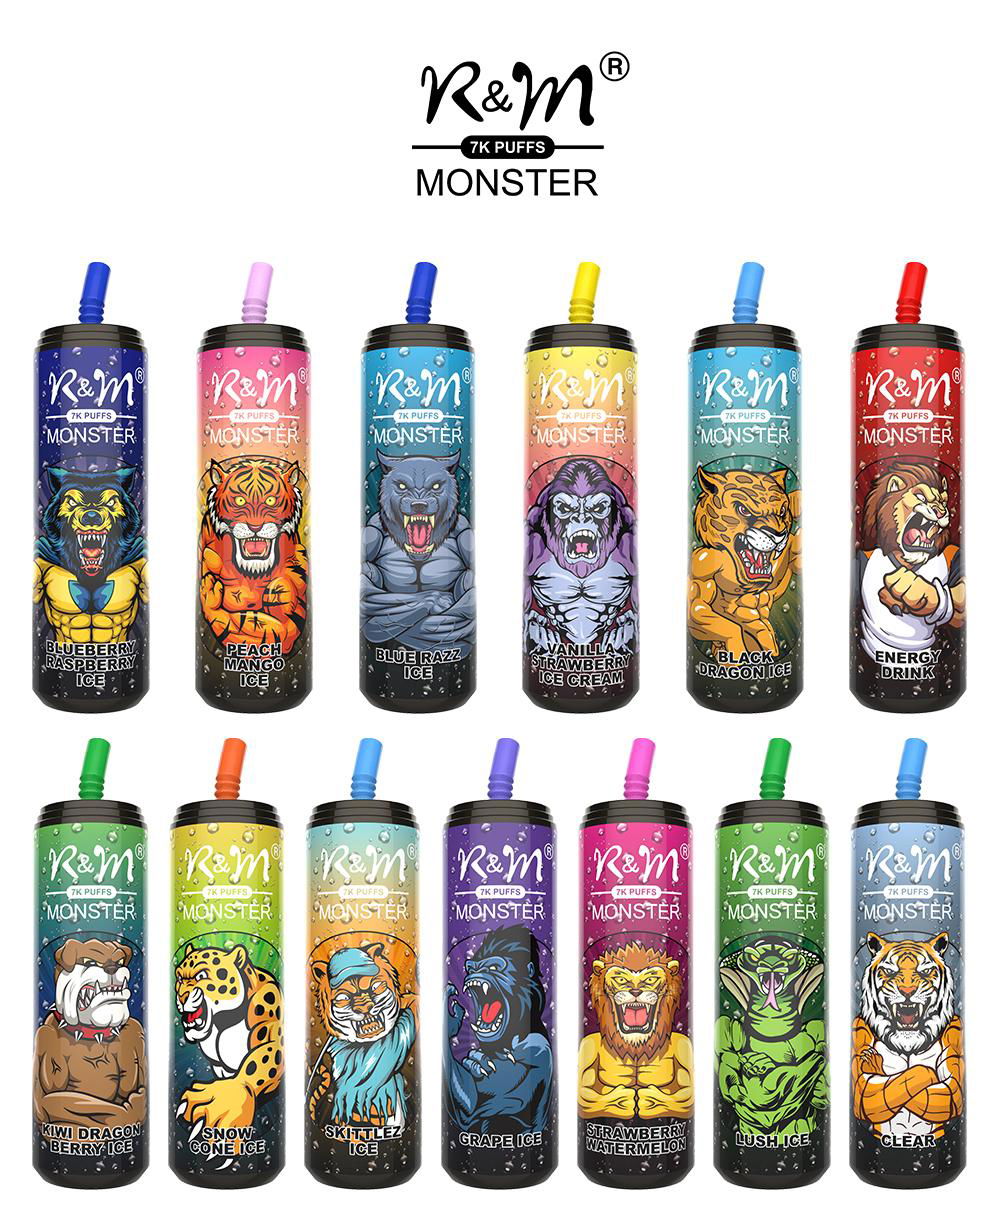 R&M Monster 7000 puffs cola shape with lanyard disposable vape 